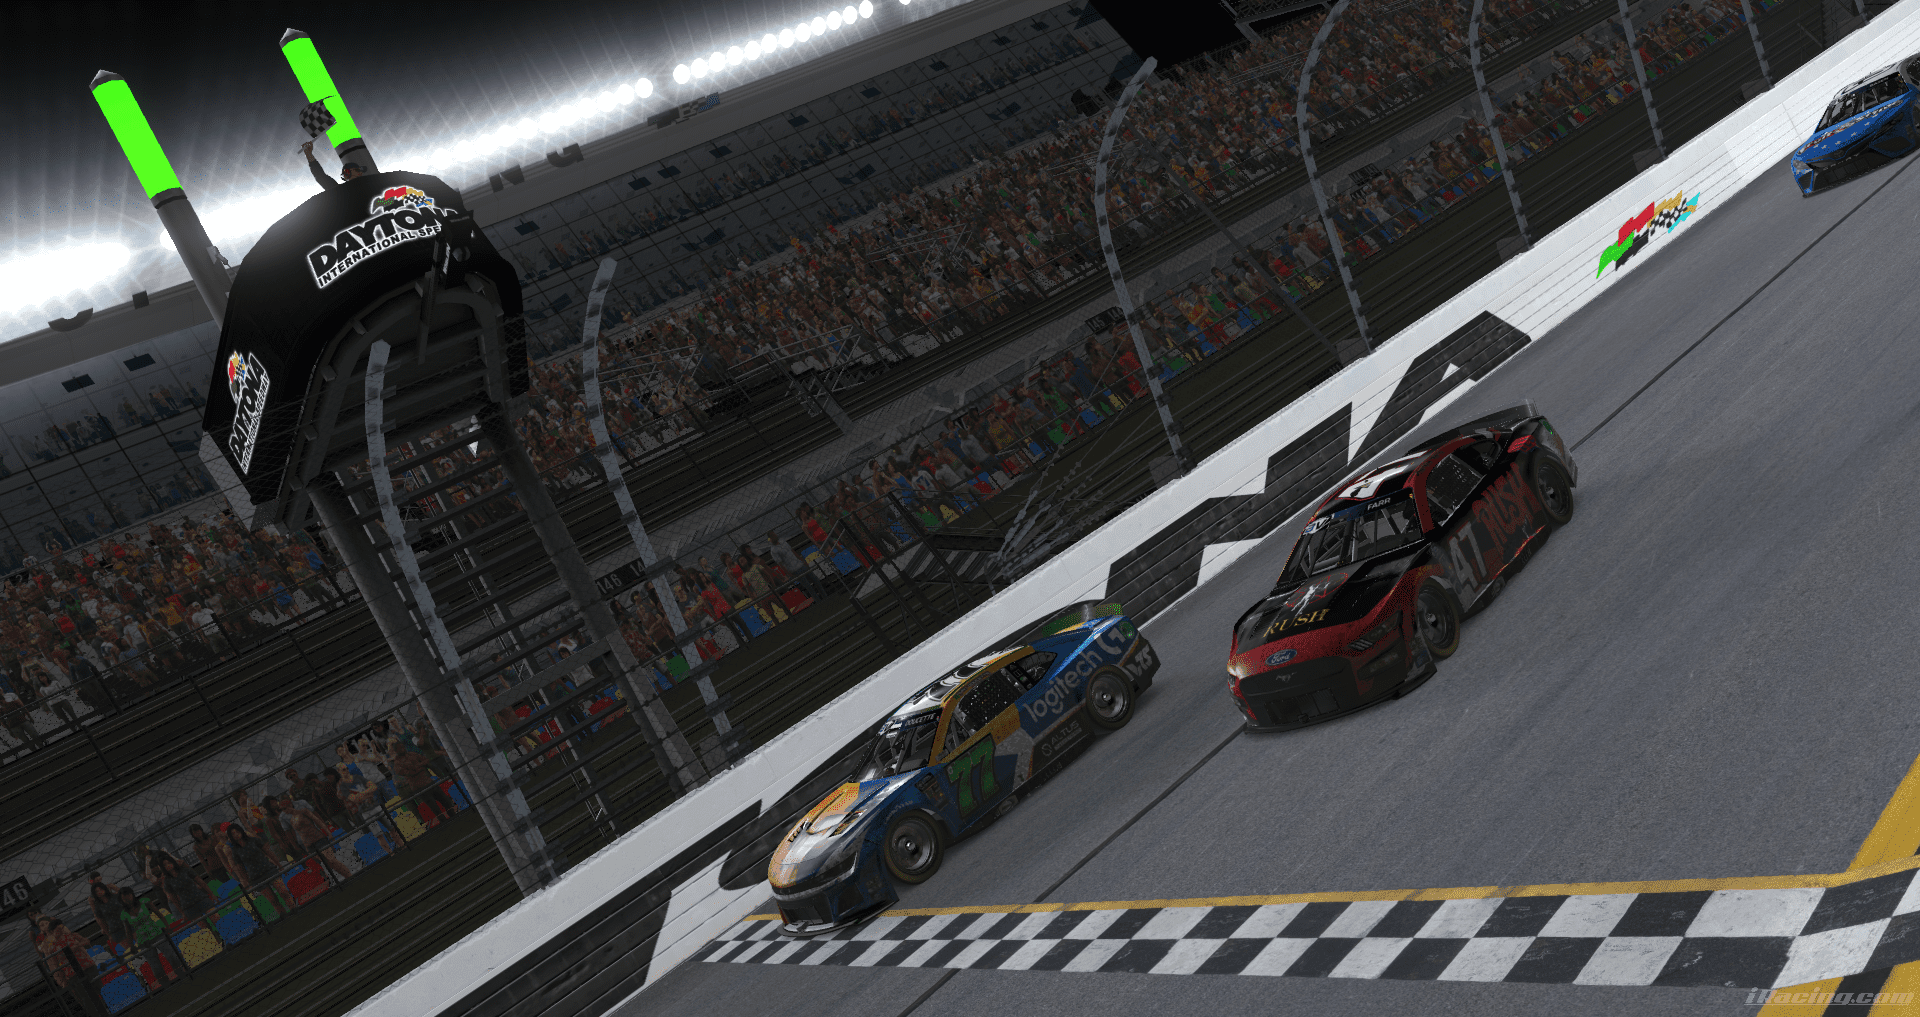 eNASCAR Coca-Cola iRacing Series driver Ryan Doucette wins the Barr Visuals FTF 500 in a photo finish.